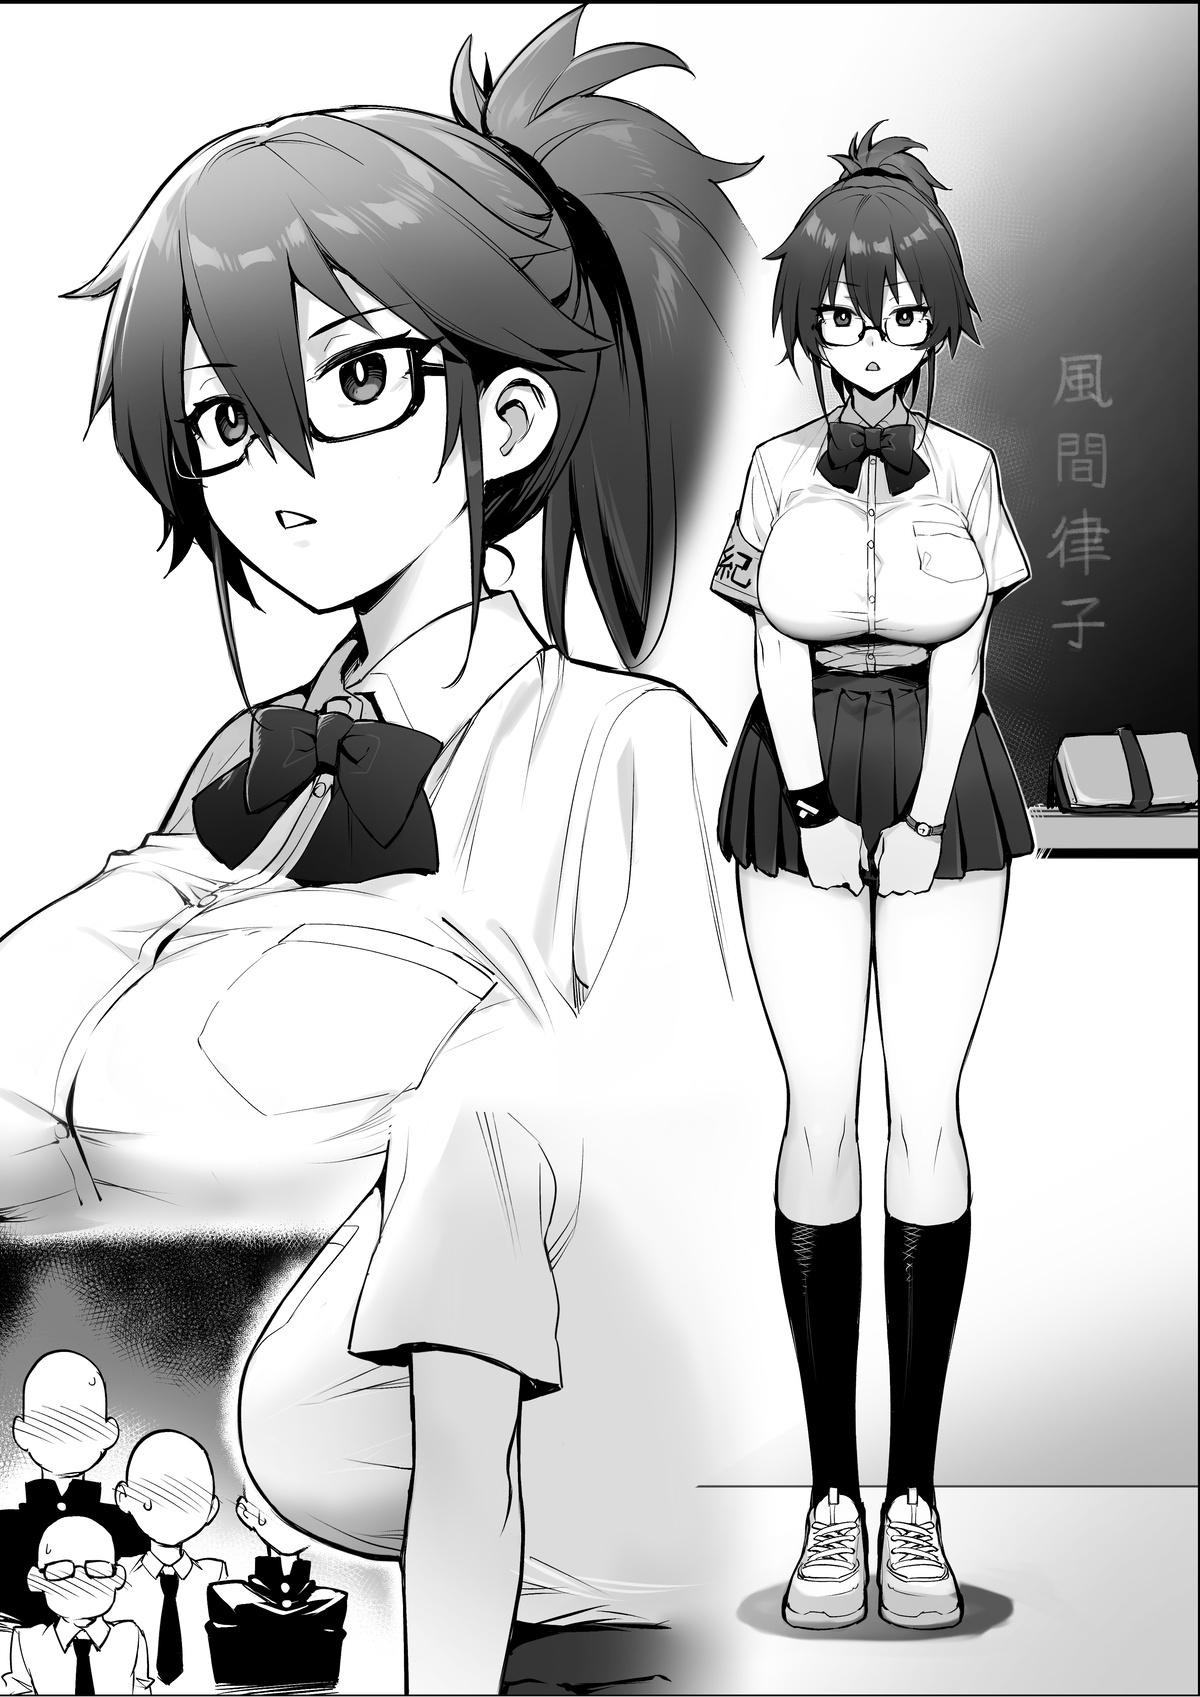 Rumor Has It That The New Chairman of Disciplinary Committee Has Huge Breasts. 25